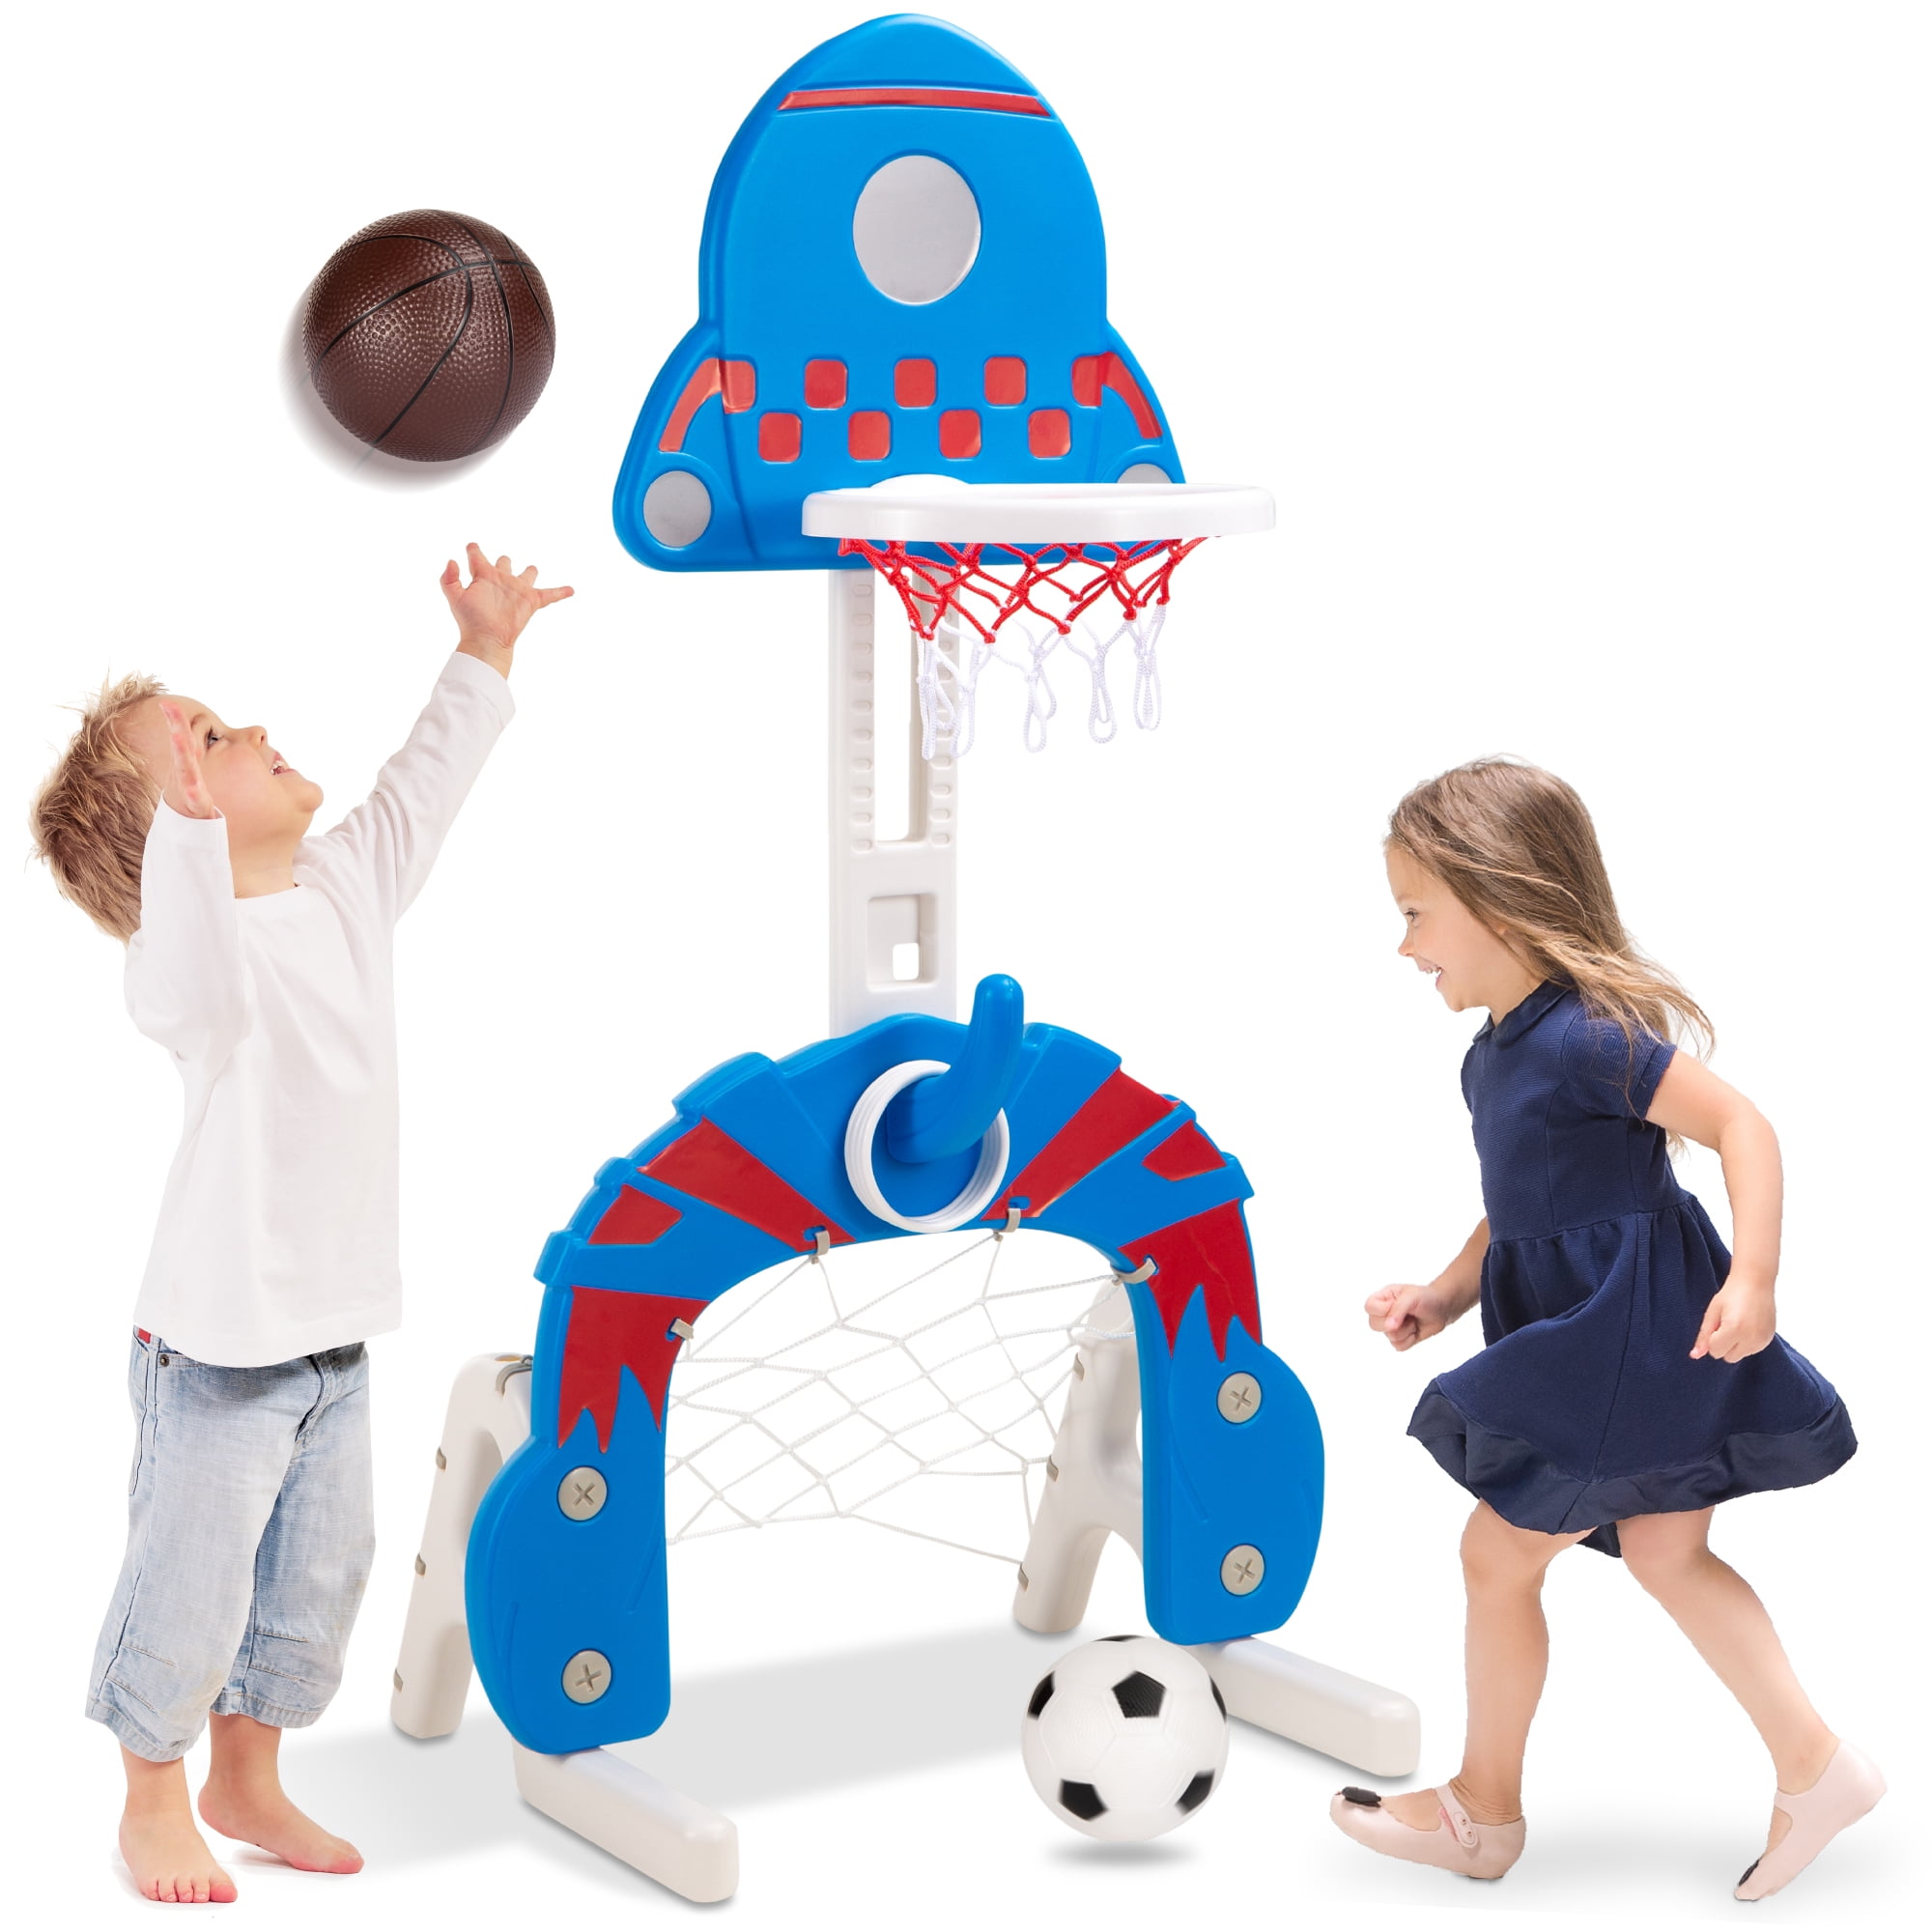 Details about   ❥3 In 1 Adjustable Basketball Hoop Stand With Basketball/Ring Toss/Soccer Sports 